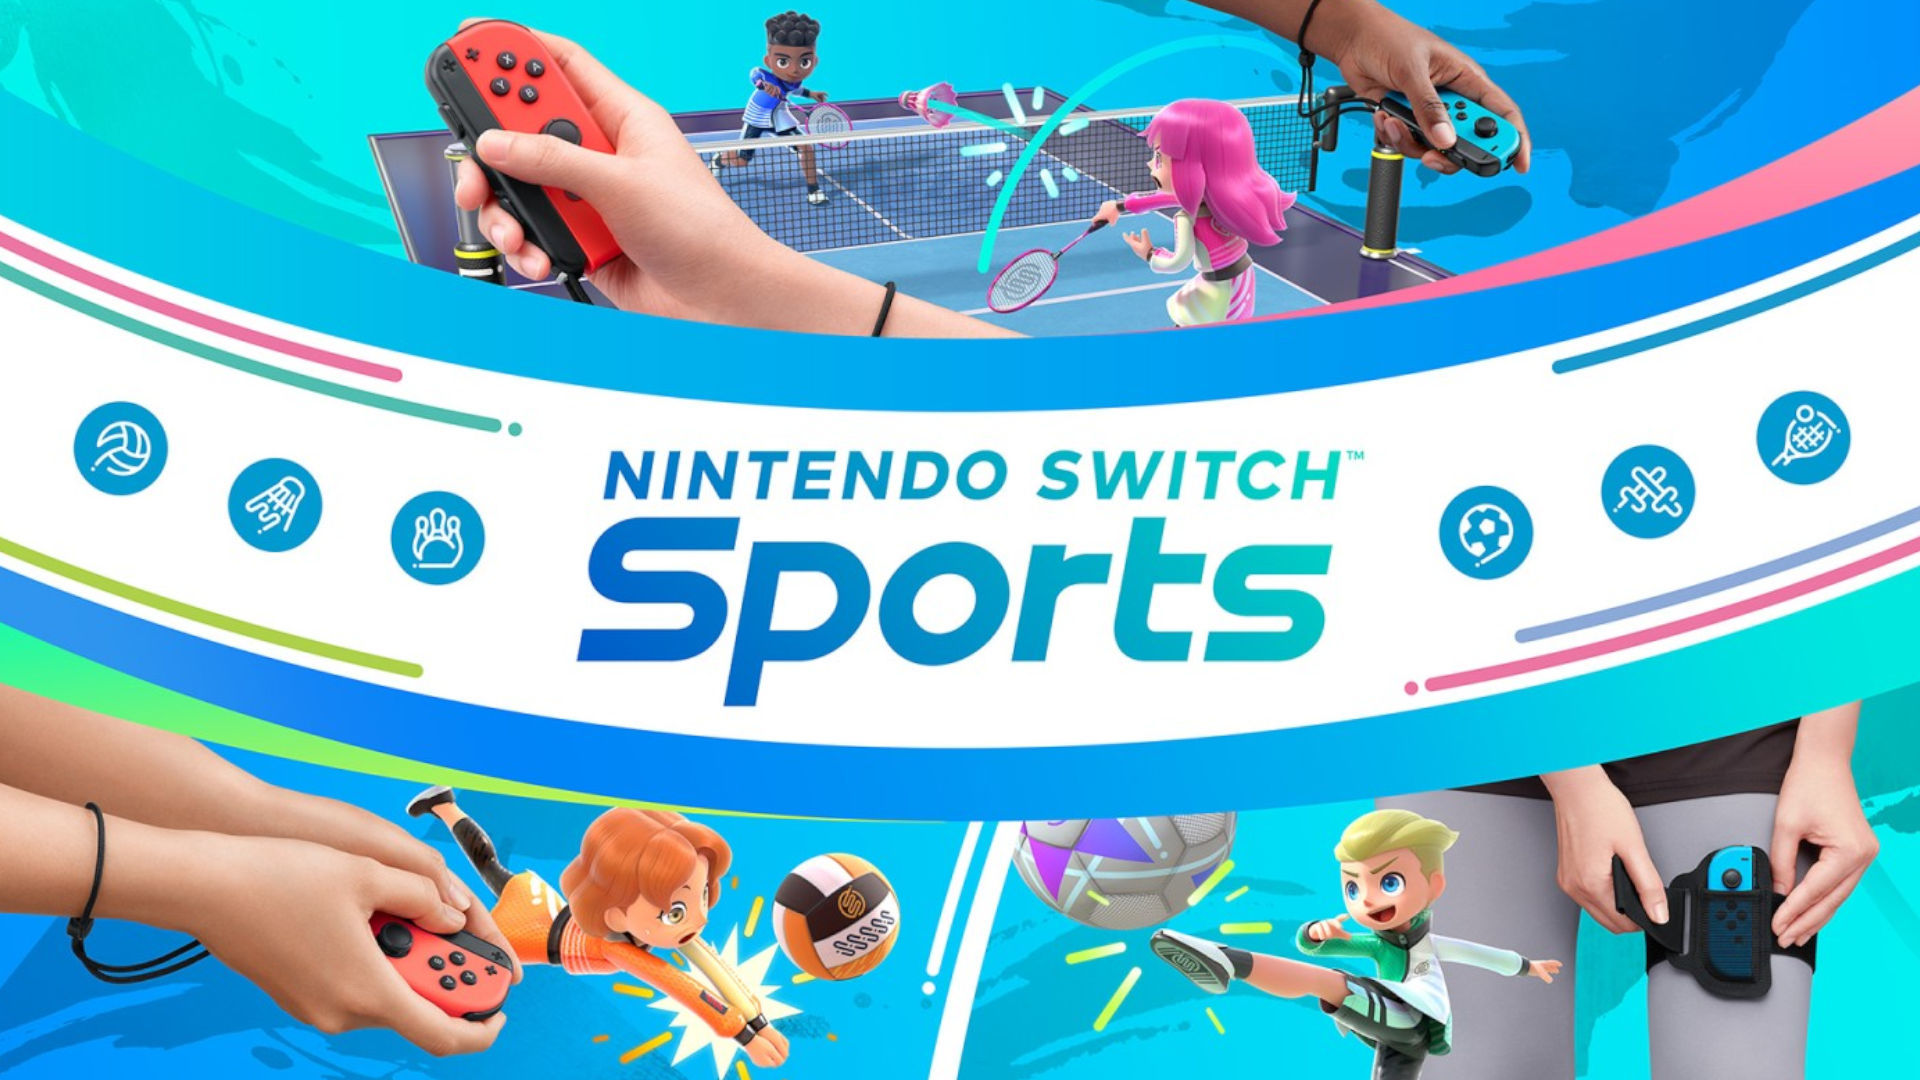 Strikes and spares – the best bowling games on Switch and mobile